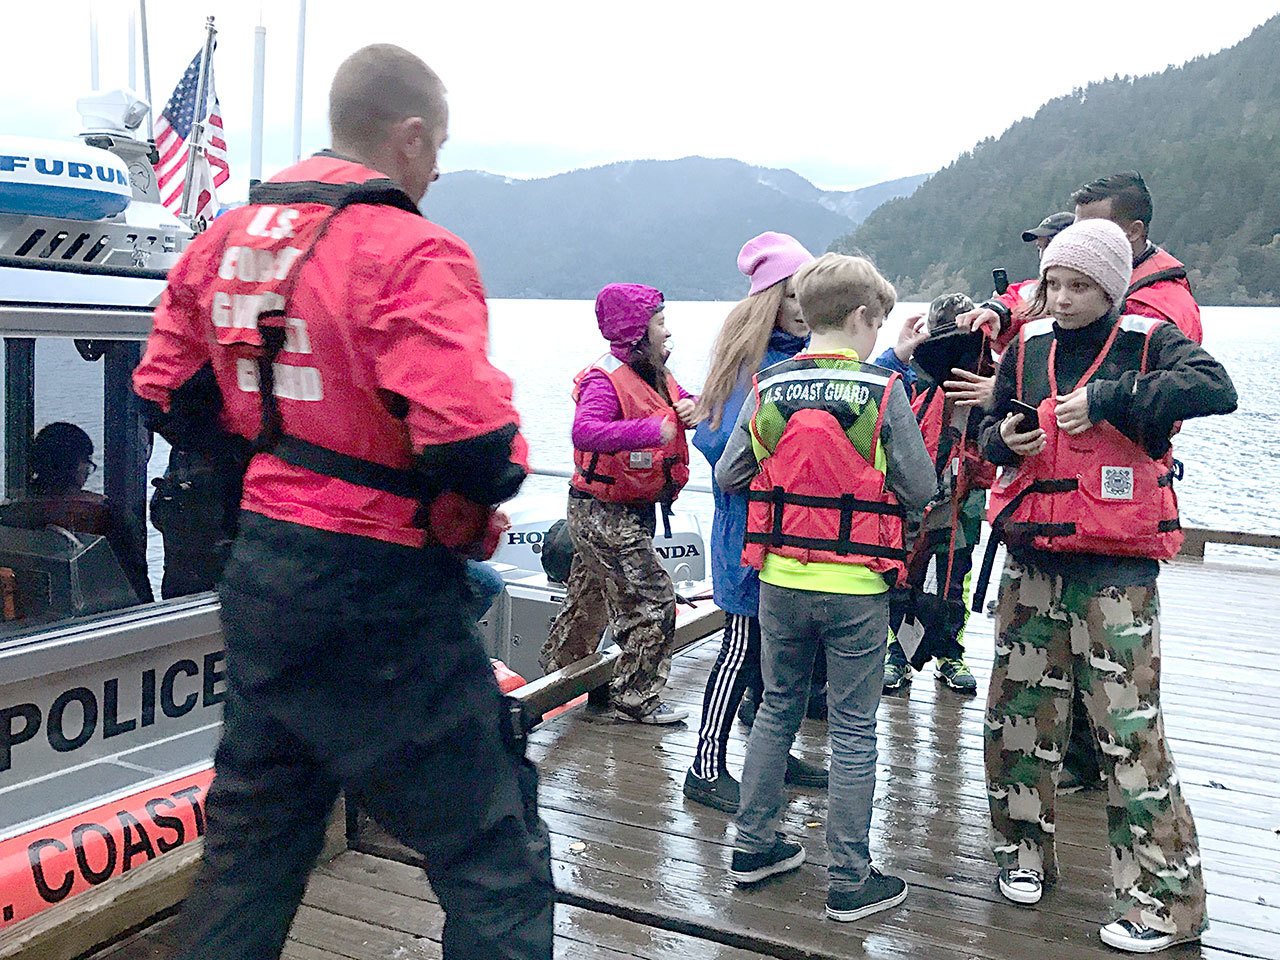 A Coast Guard Station Port Angeles boat crew assists in the rescue of 40 kids and six adults who were stranded at Camp David on Lake Crescent on Friday. The kids, whose ages ranged from 13 to 14 years old, were on an annual school trip from Stevens Middle School, out of Port Angeles. (U.S. Coast Guard)